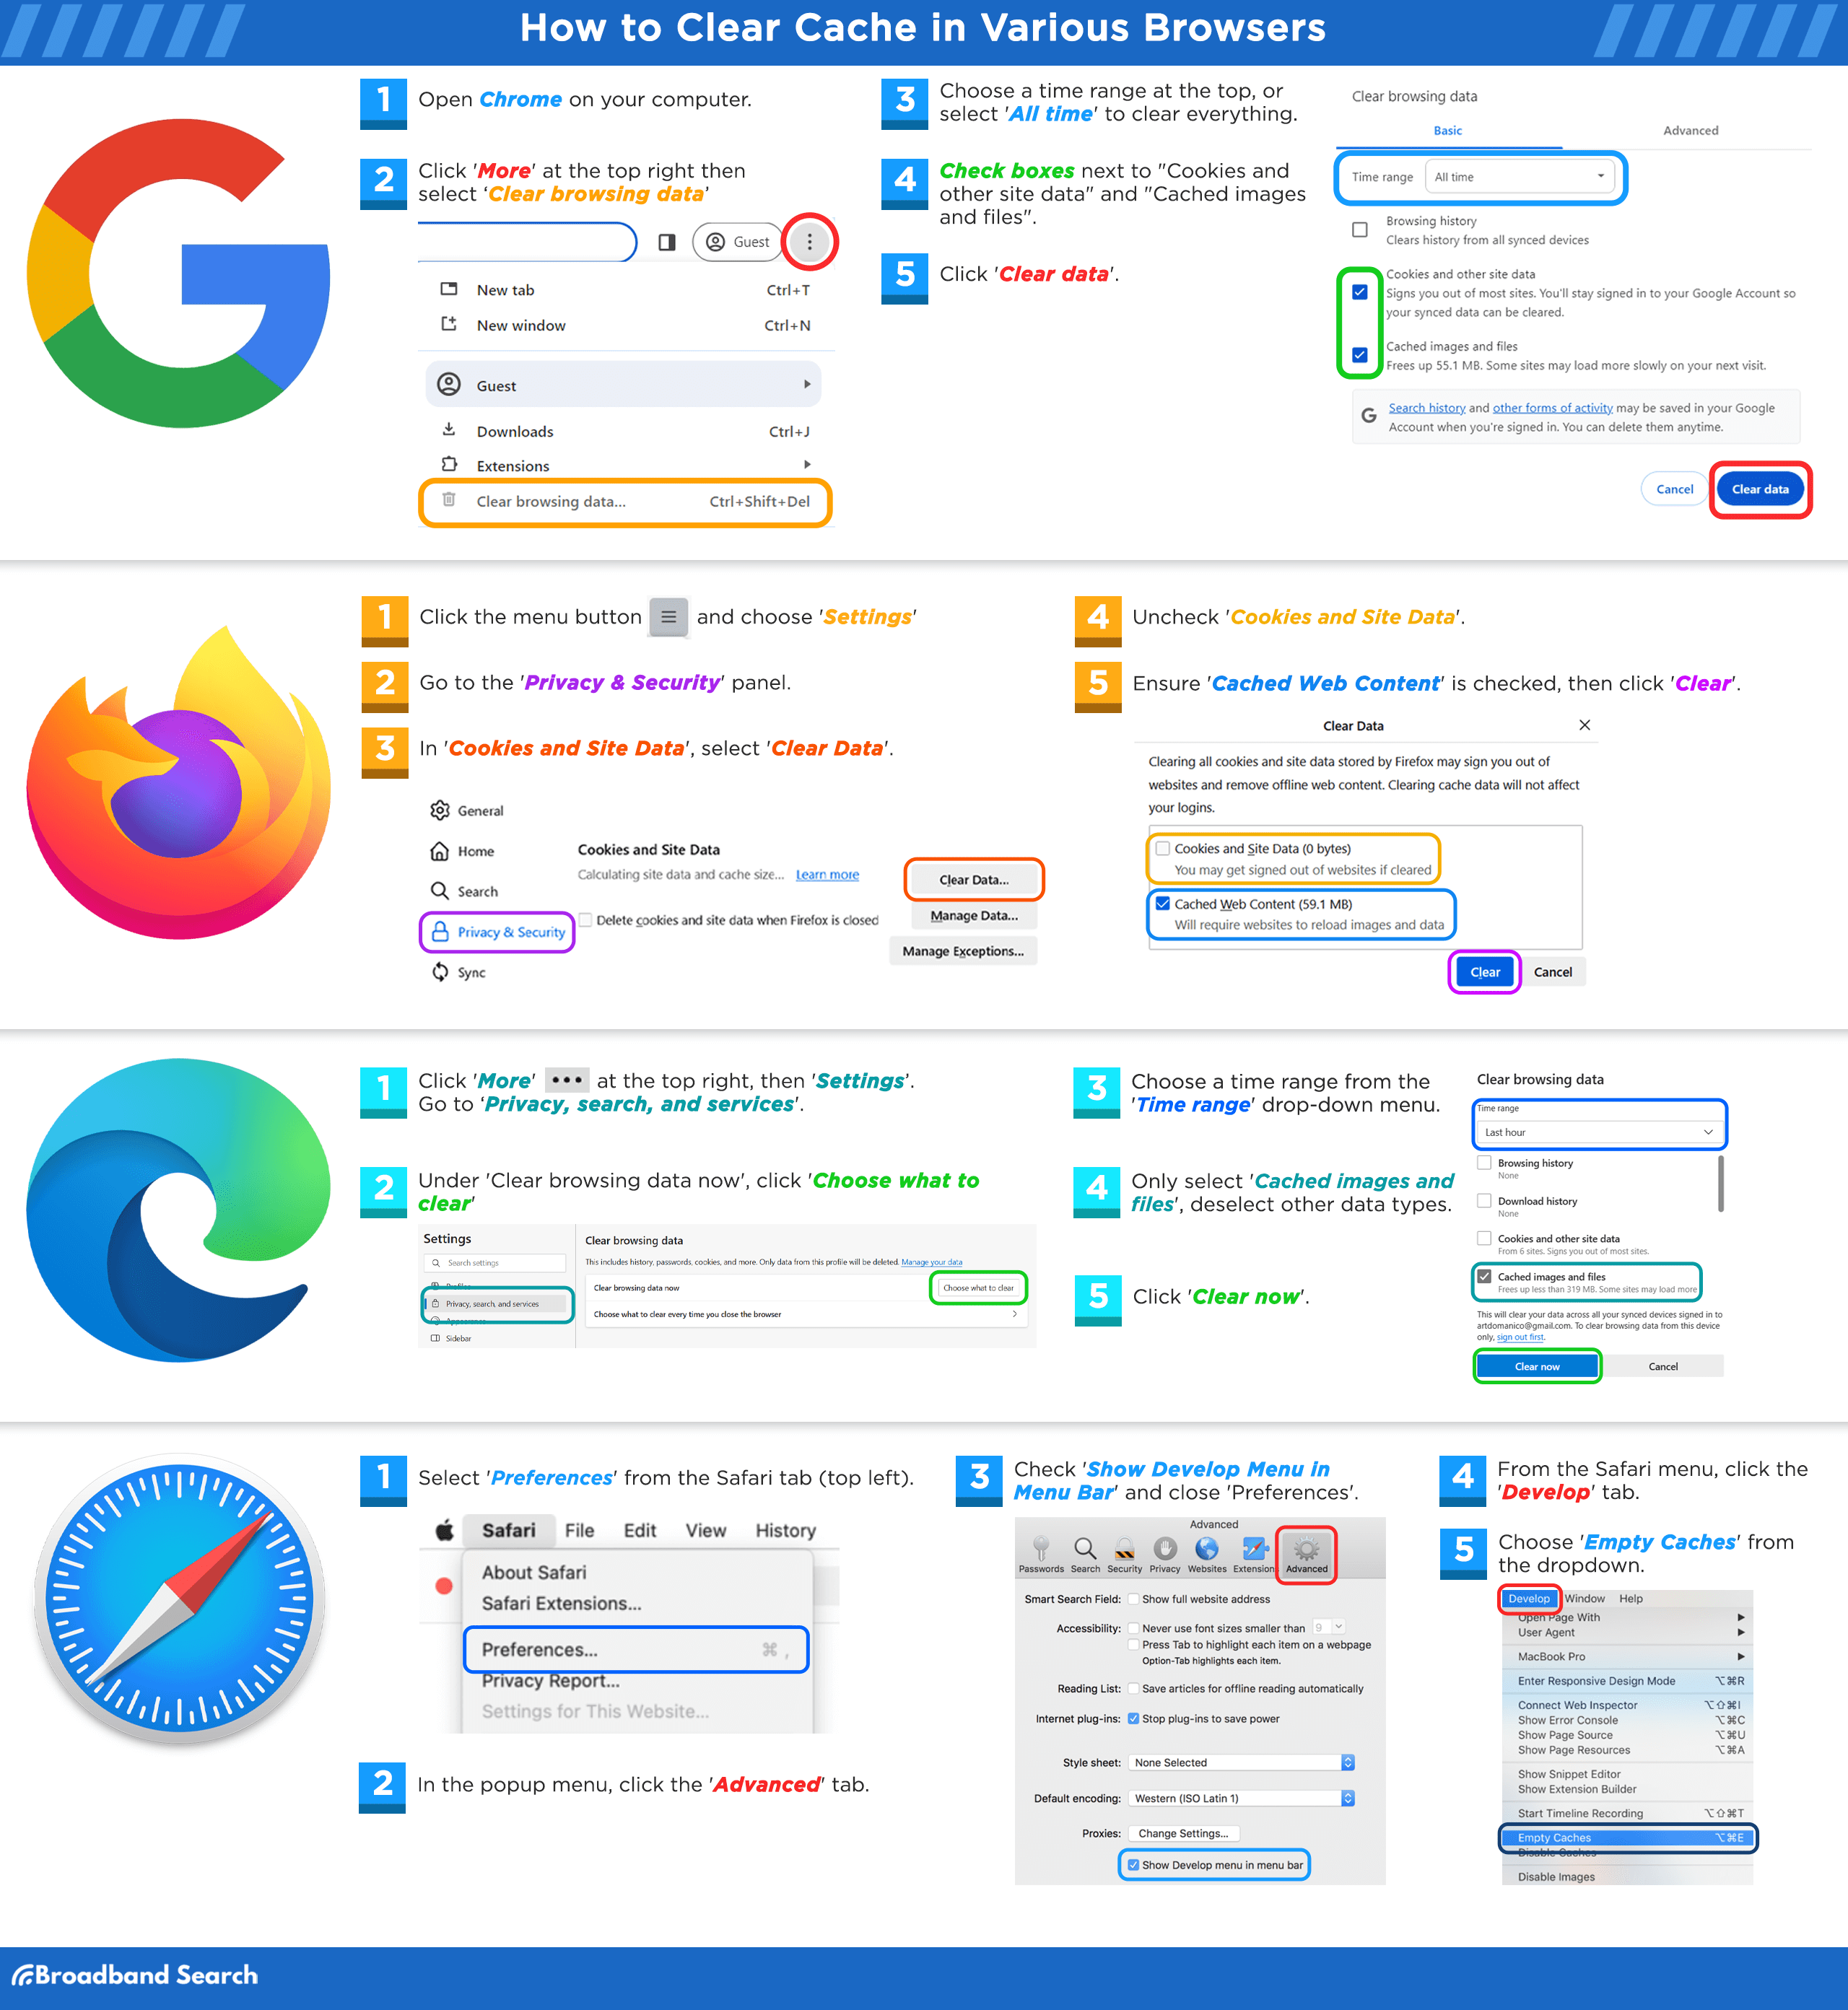 Steps on how to clear cache in various browsers